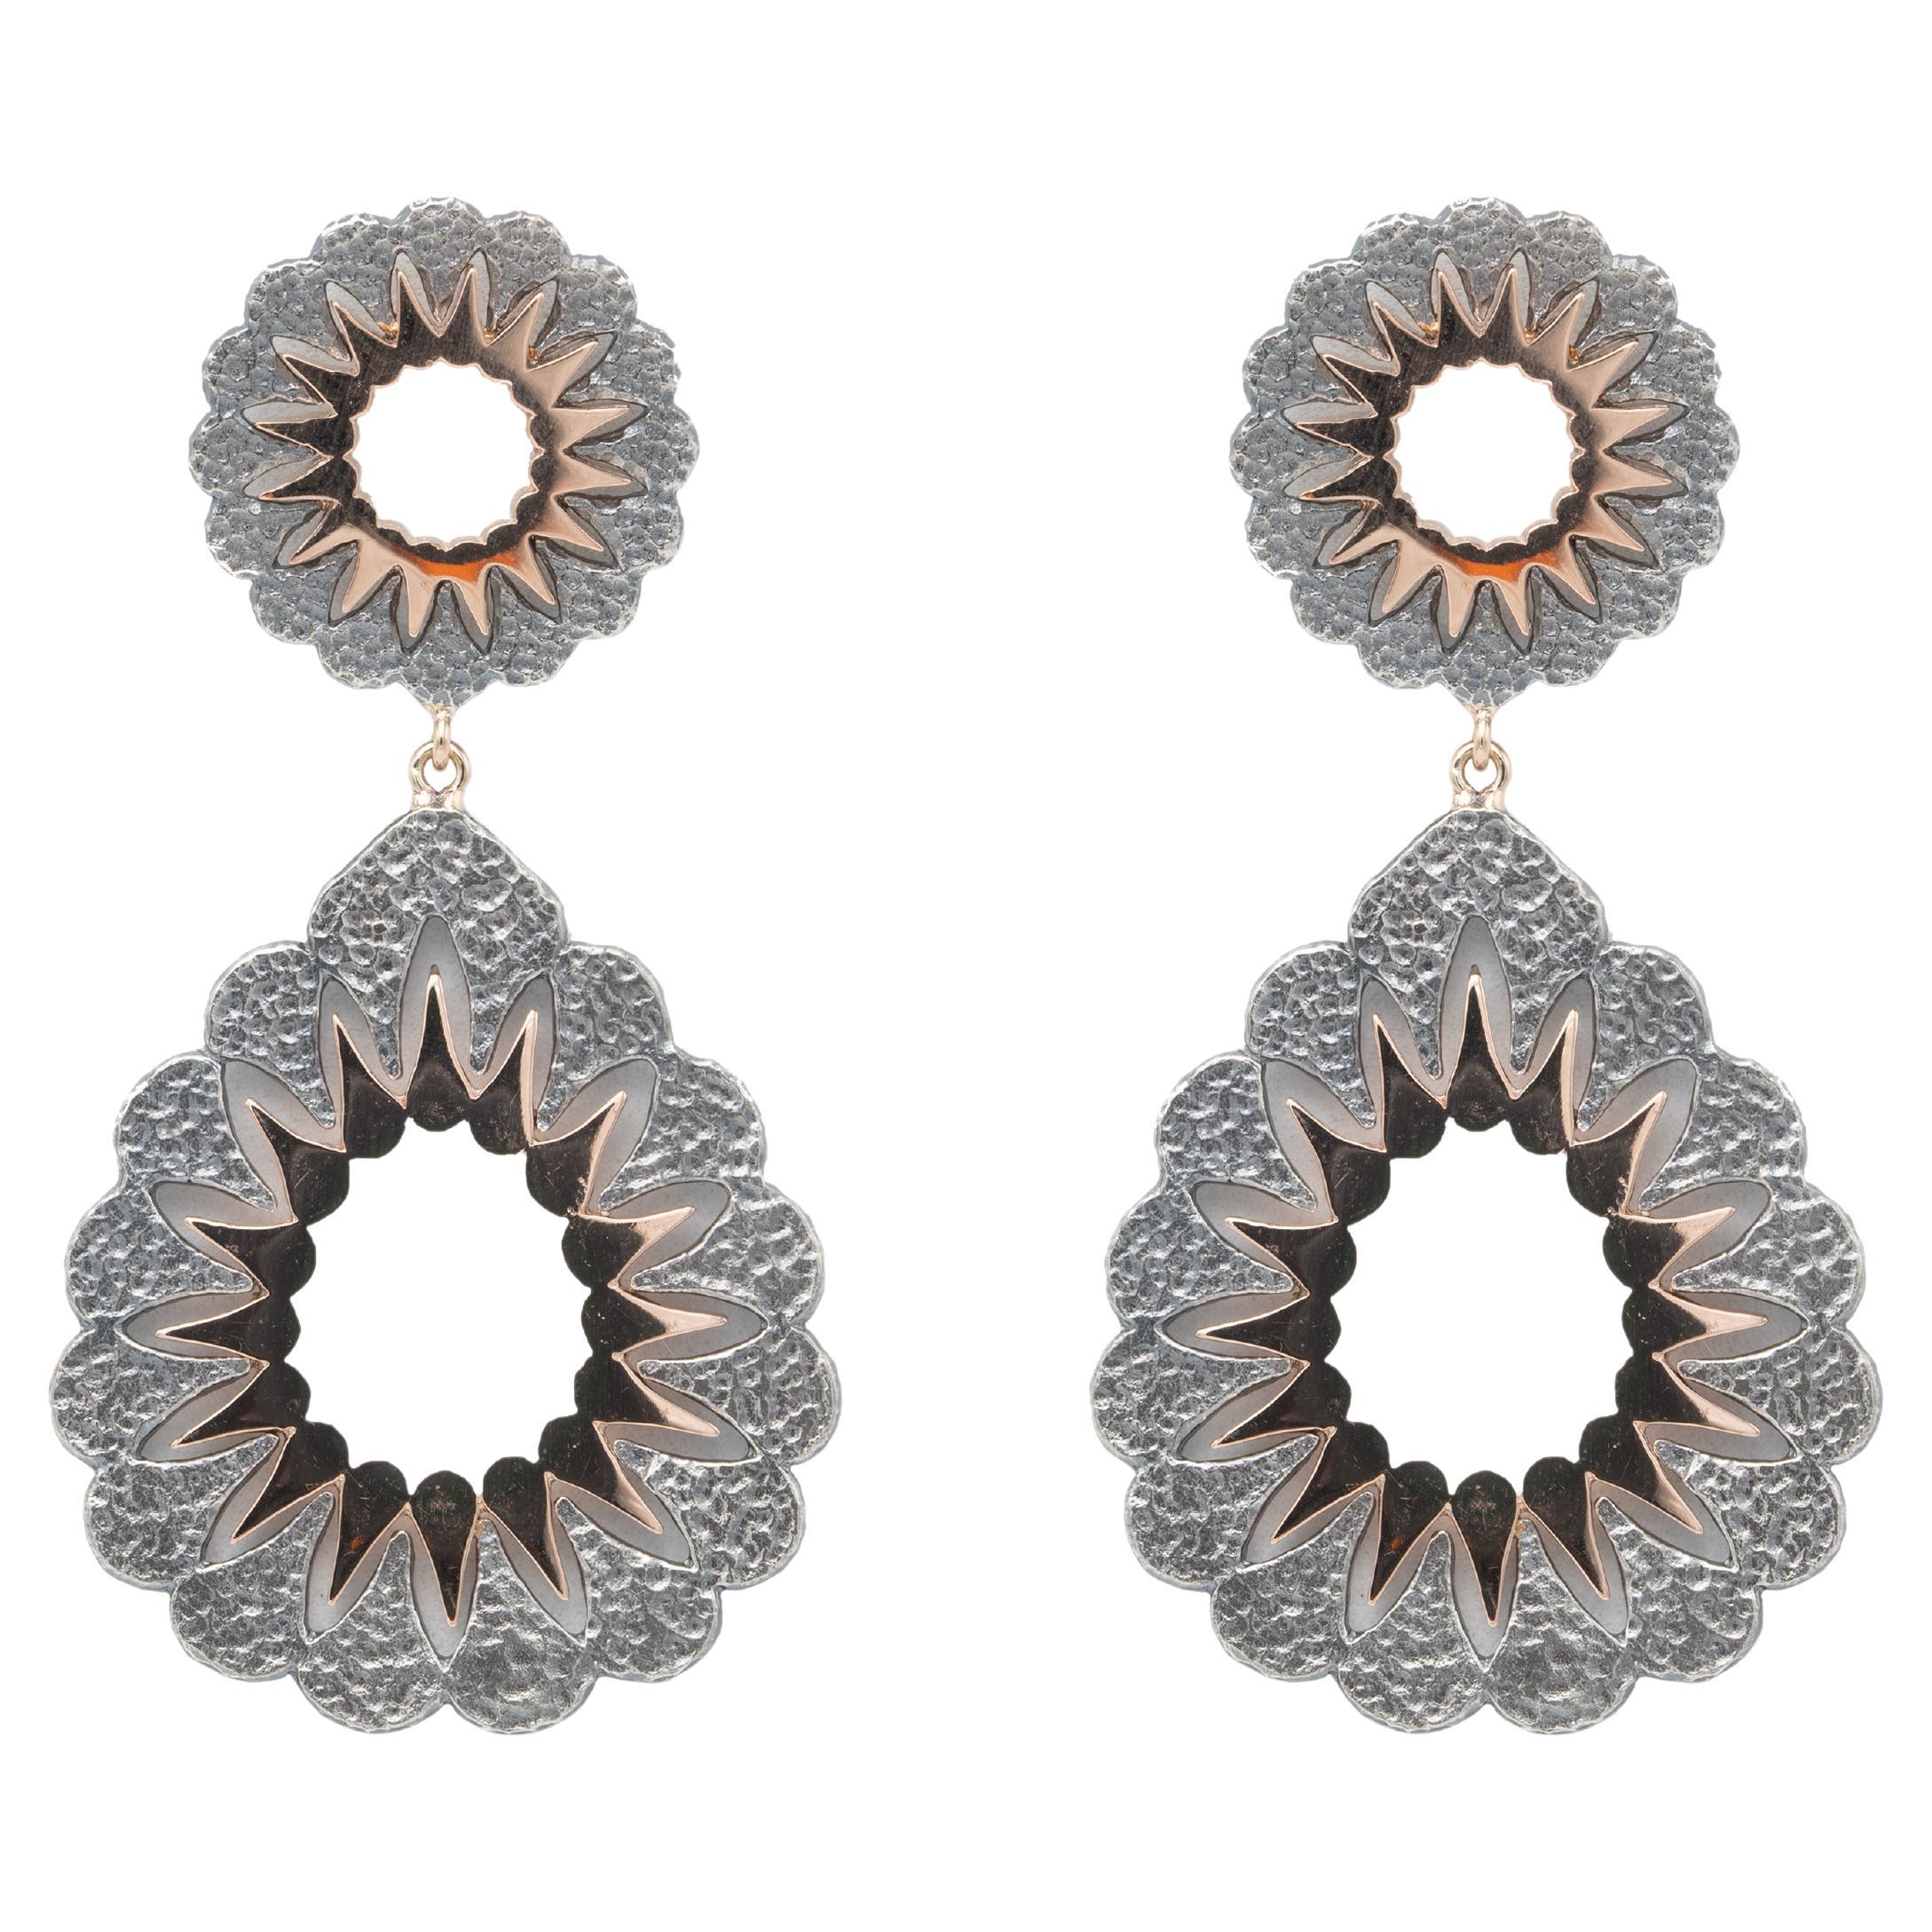 URART "NILES" 9k Rose Gold and Sterling Silver Nile Drop Pierced Earrings  For Sale